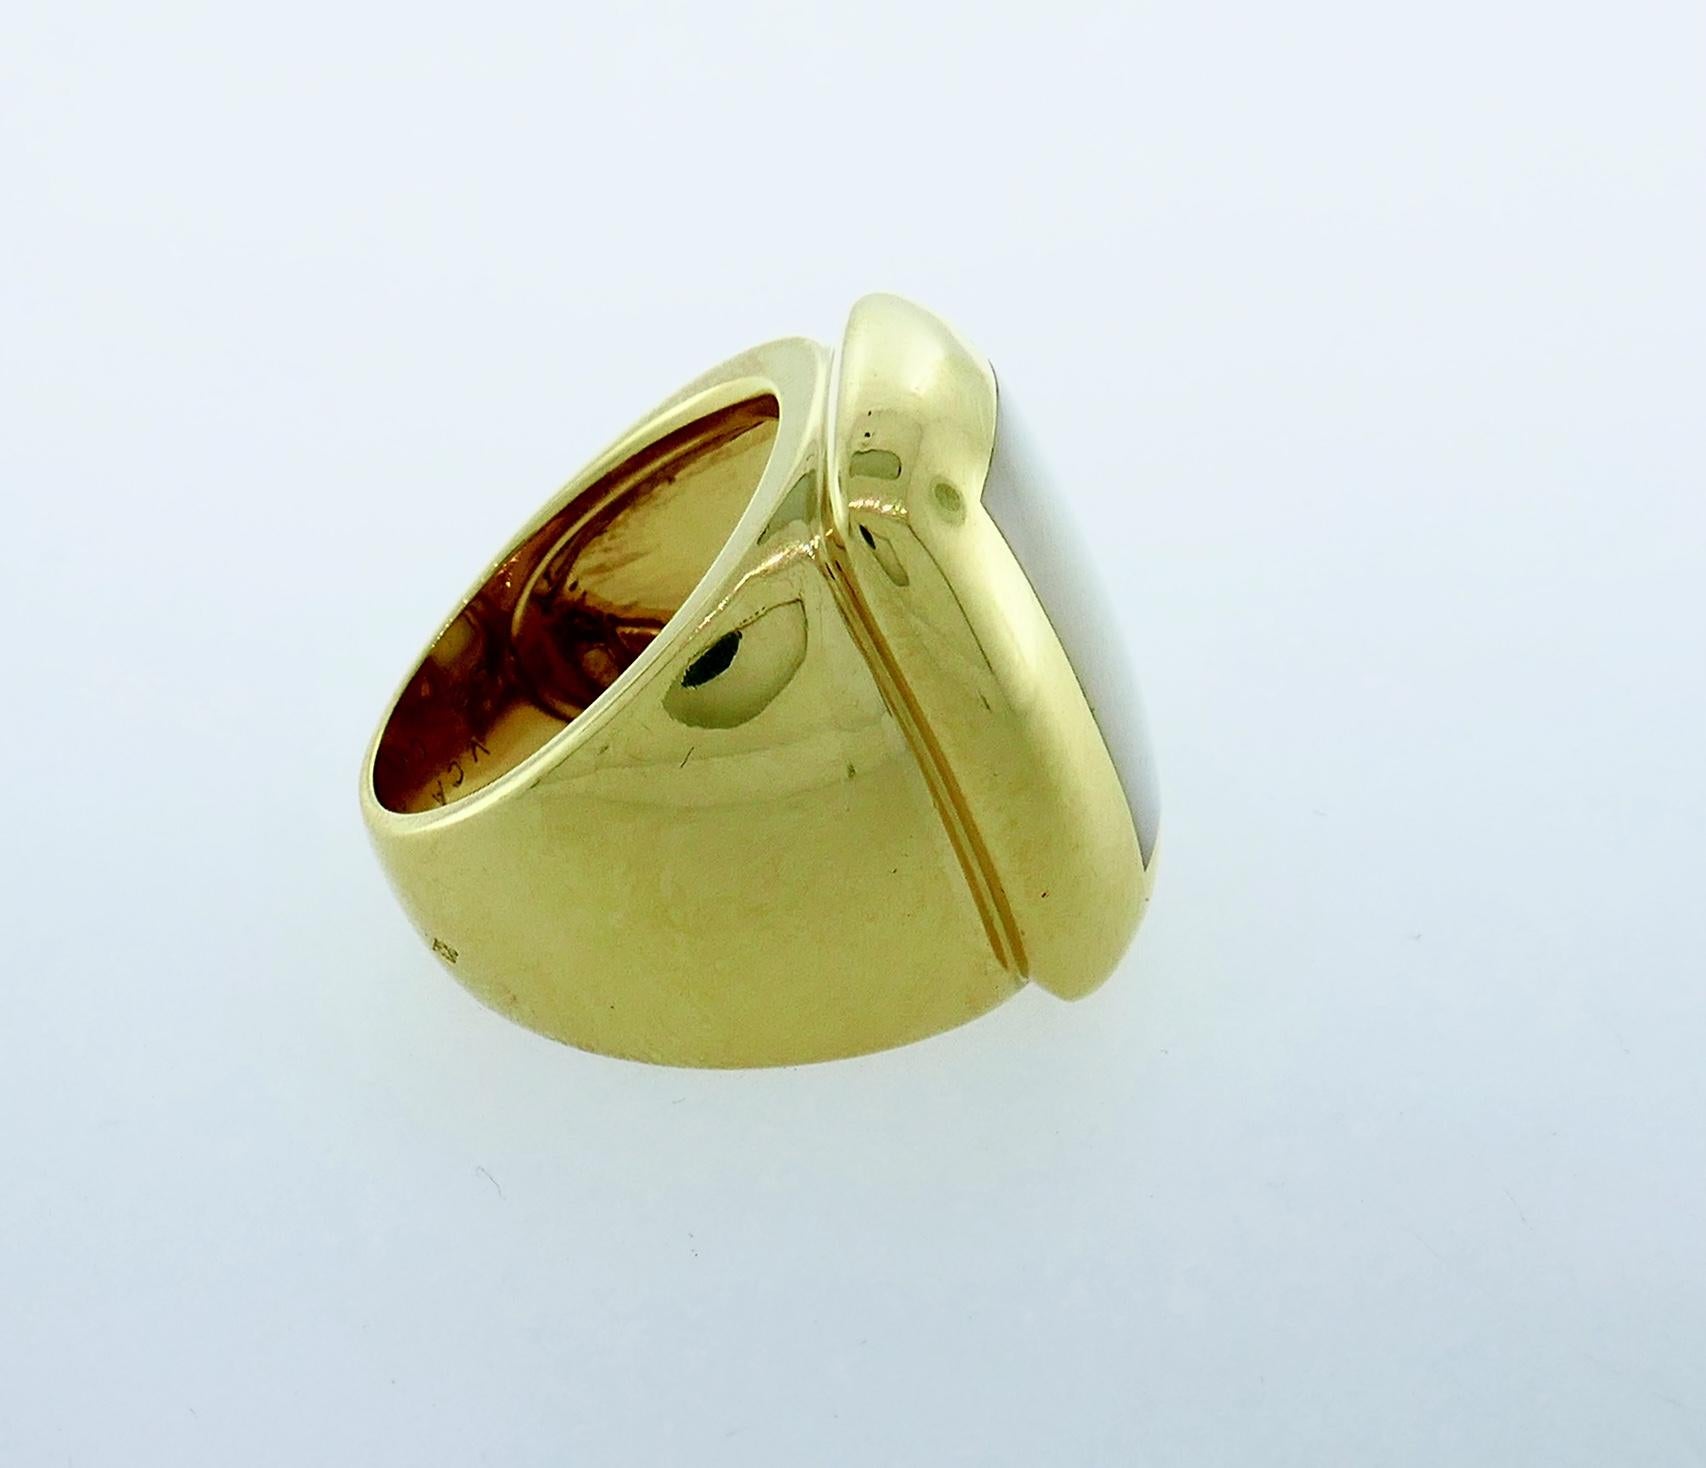 Massive and elegant, this signet-like looking ring from Van Cleef and Arpels is made of 18k (stamped) yellow gold features mother of pearl plaque.
Has a smooth finish and a rounded rectangular shape.
Front side is 2/3